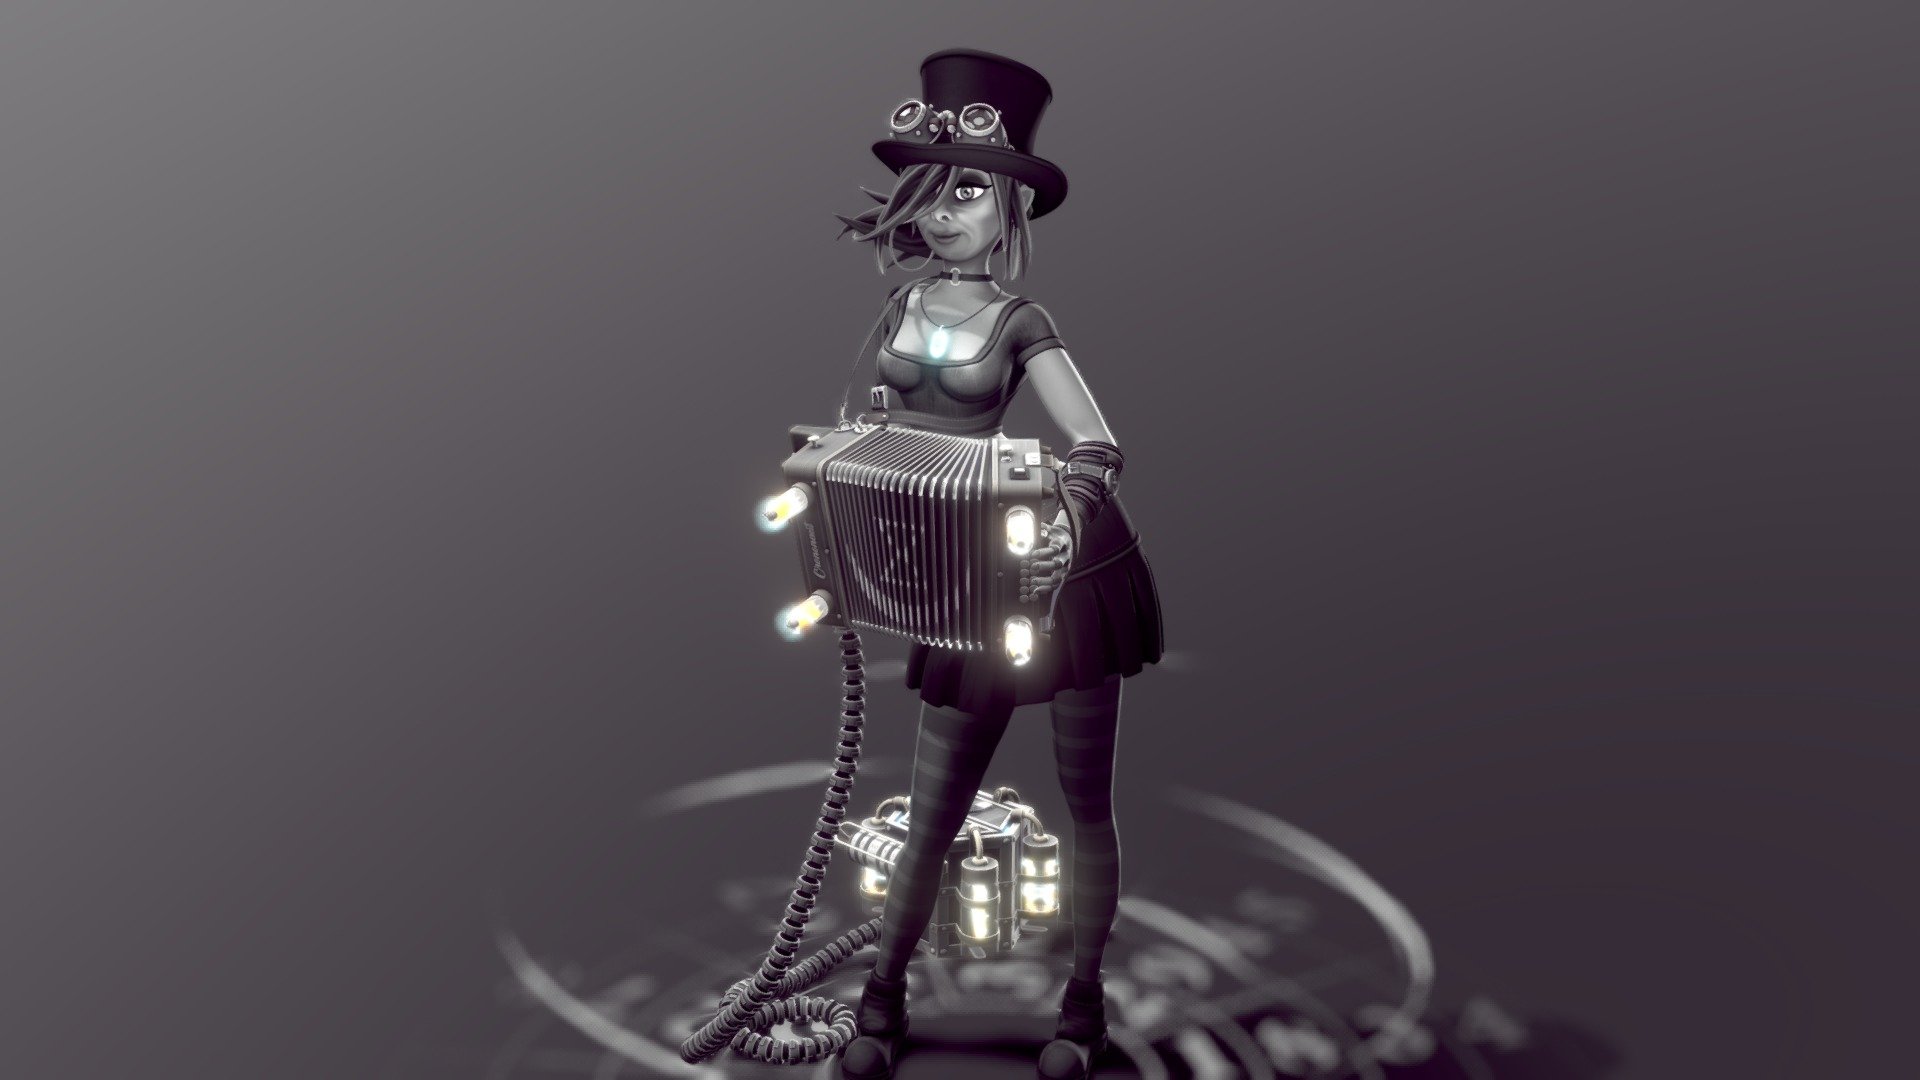 A steampunk time traveller who seems to have made a time machine&hellip; out of an accordion!?

It was sculpted/modelled and hand-painted in Blender 3.1.2, with some baking done in Substance Painter 3d model